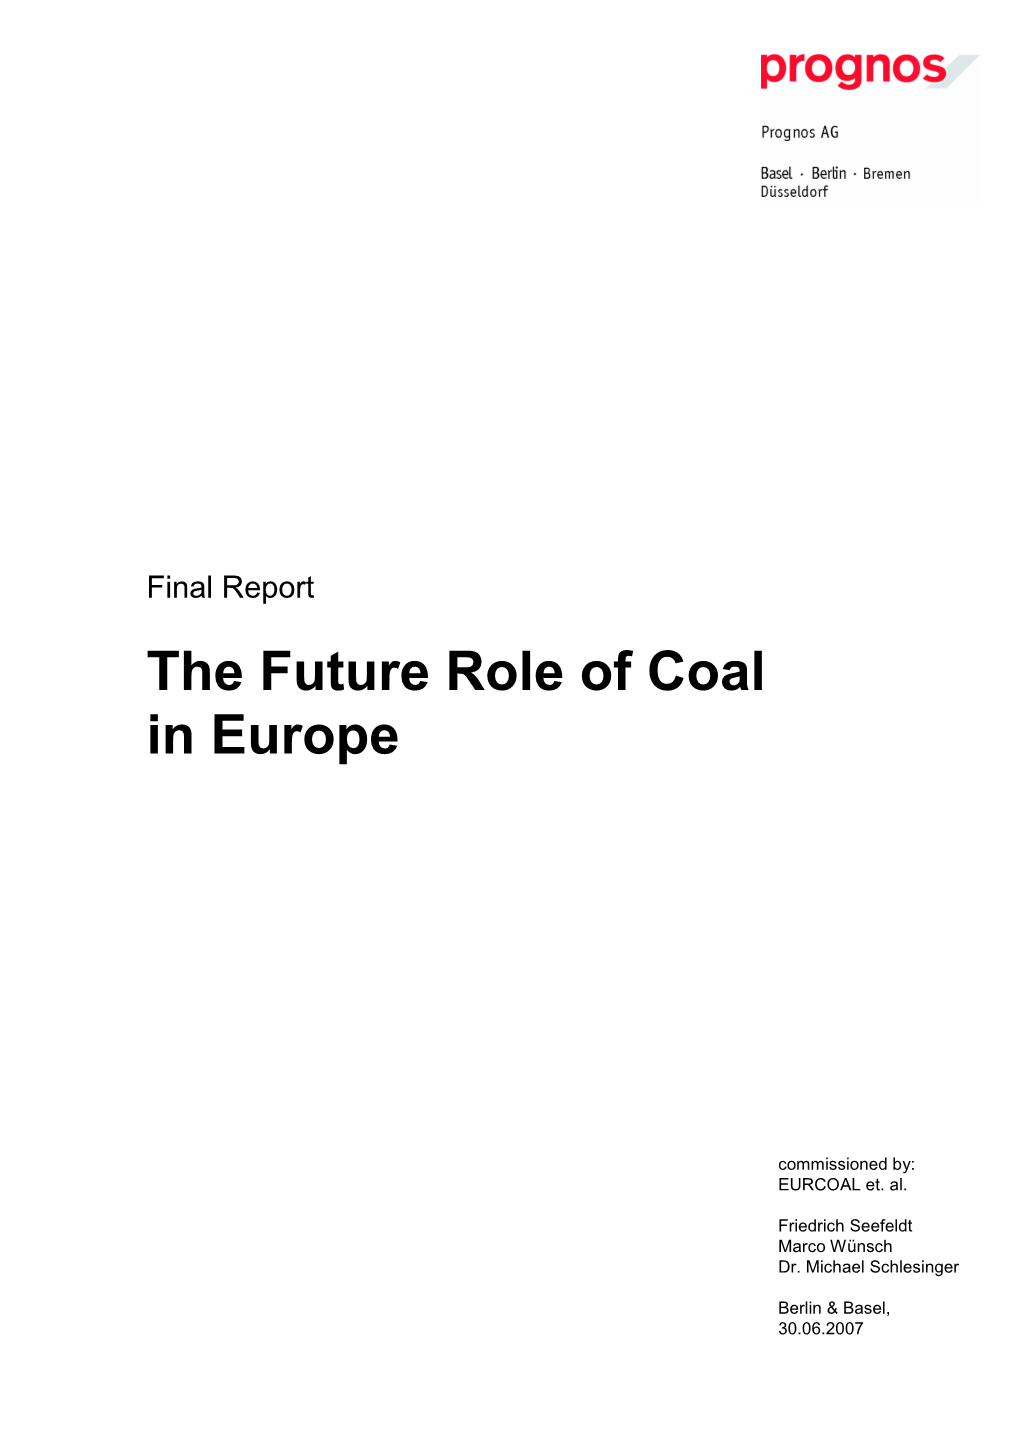 The Future Role of Coal in Europe